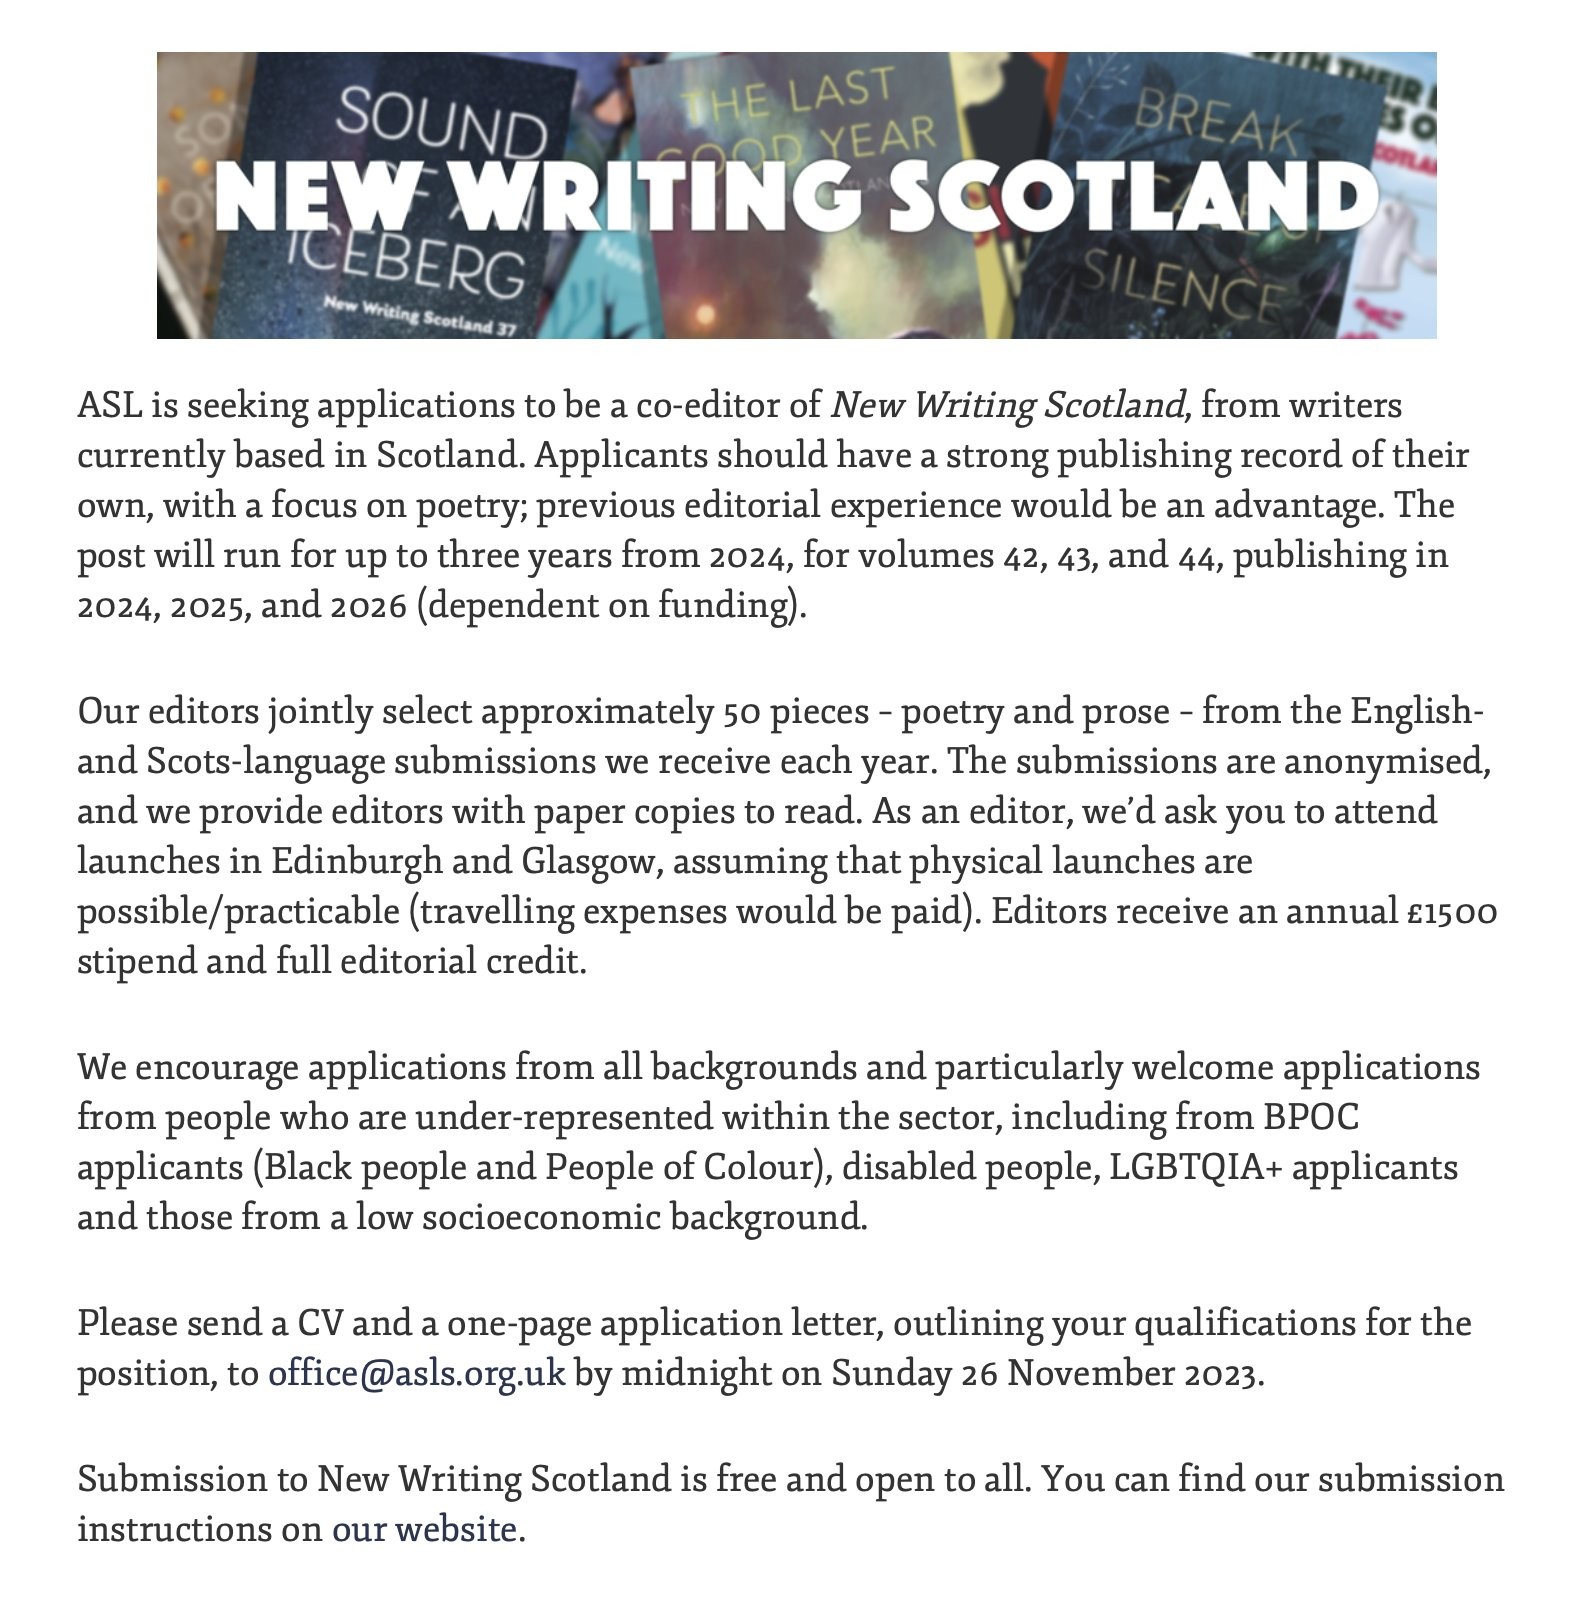 ASL is seeking applications to be a co-editor of New Writing Scotland, from writers currently based in Scotland. Applicants should have a strong publishing record of their own, with a focus on poetry; previous editorial experience would be an advantage. The post will run for up to three years from 2024, for volumes 42, 43, and 44, publishing in 2024, 2025, and 2026 (dependent on funding). 

Our editors jointly select approximately 50 pieces – poetry and prose – from the English- and Scots-language submissions we receive each year. The submissions are anonymised, and we provide editors with paper copies to read. As an editor, we’d ask you to attend launches in Edinburgh and Glasgow, assuming that physical launches are possible/practicable (travelling expenses would be paid). Editors receive an annual £1500 stipend and full editorial credit.

We encourage applications from all backgrounds and particularly welcome applications from people who are under-represented within the sector, including from BPOC applicants (Black people and People of Colour), disabled people, LGBTQIA+ applicants and those from a low socioeconomic background. 

Please send a CV and a one-page application letter, outlining your qualifications for the position, to office@asls.org.uk by midnight on Sunday 26 November 2023.

Submission to New Writing Scotland is free and open to all. You can find our submission instructions on our website.